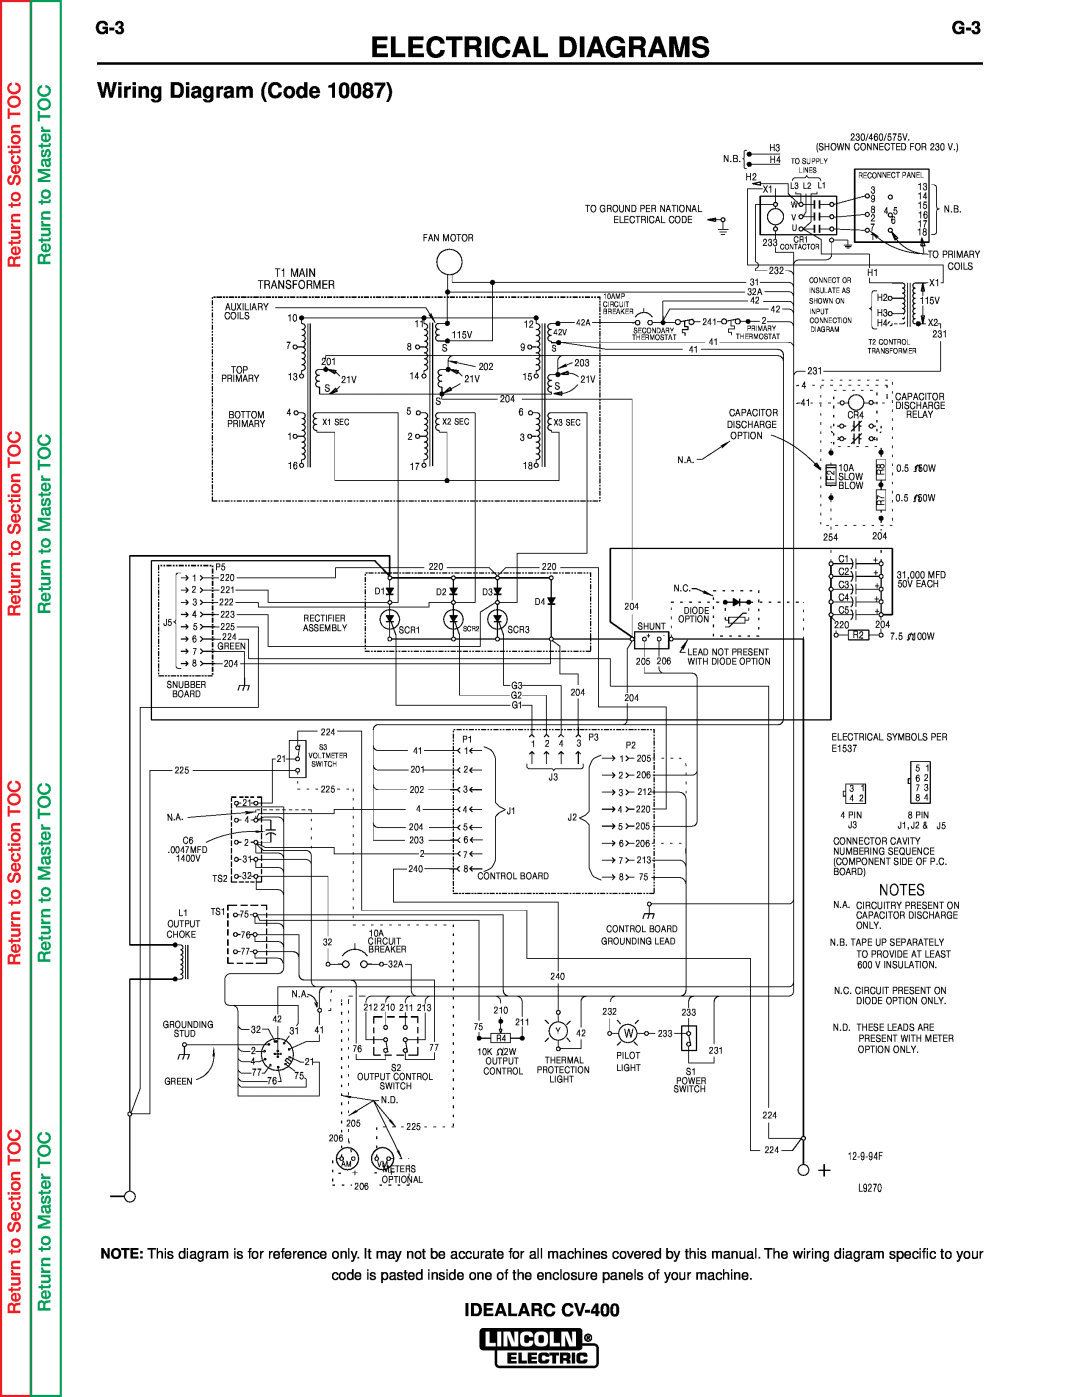 Lincoln Electric SVM136-A Wiring Diagram Code, Electrical Diagrams, Master TOC, Return to, to Section TOC 